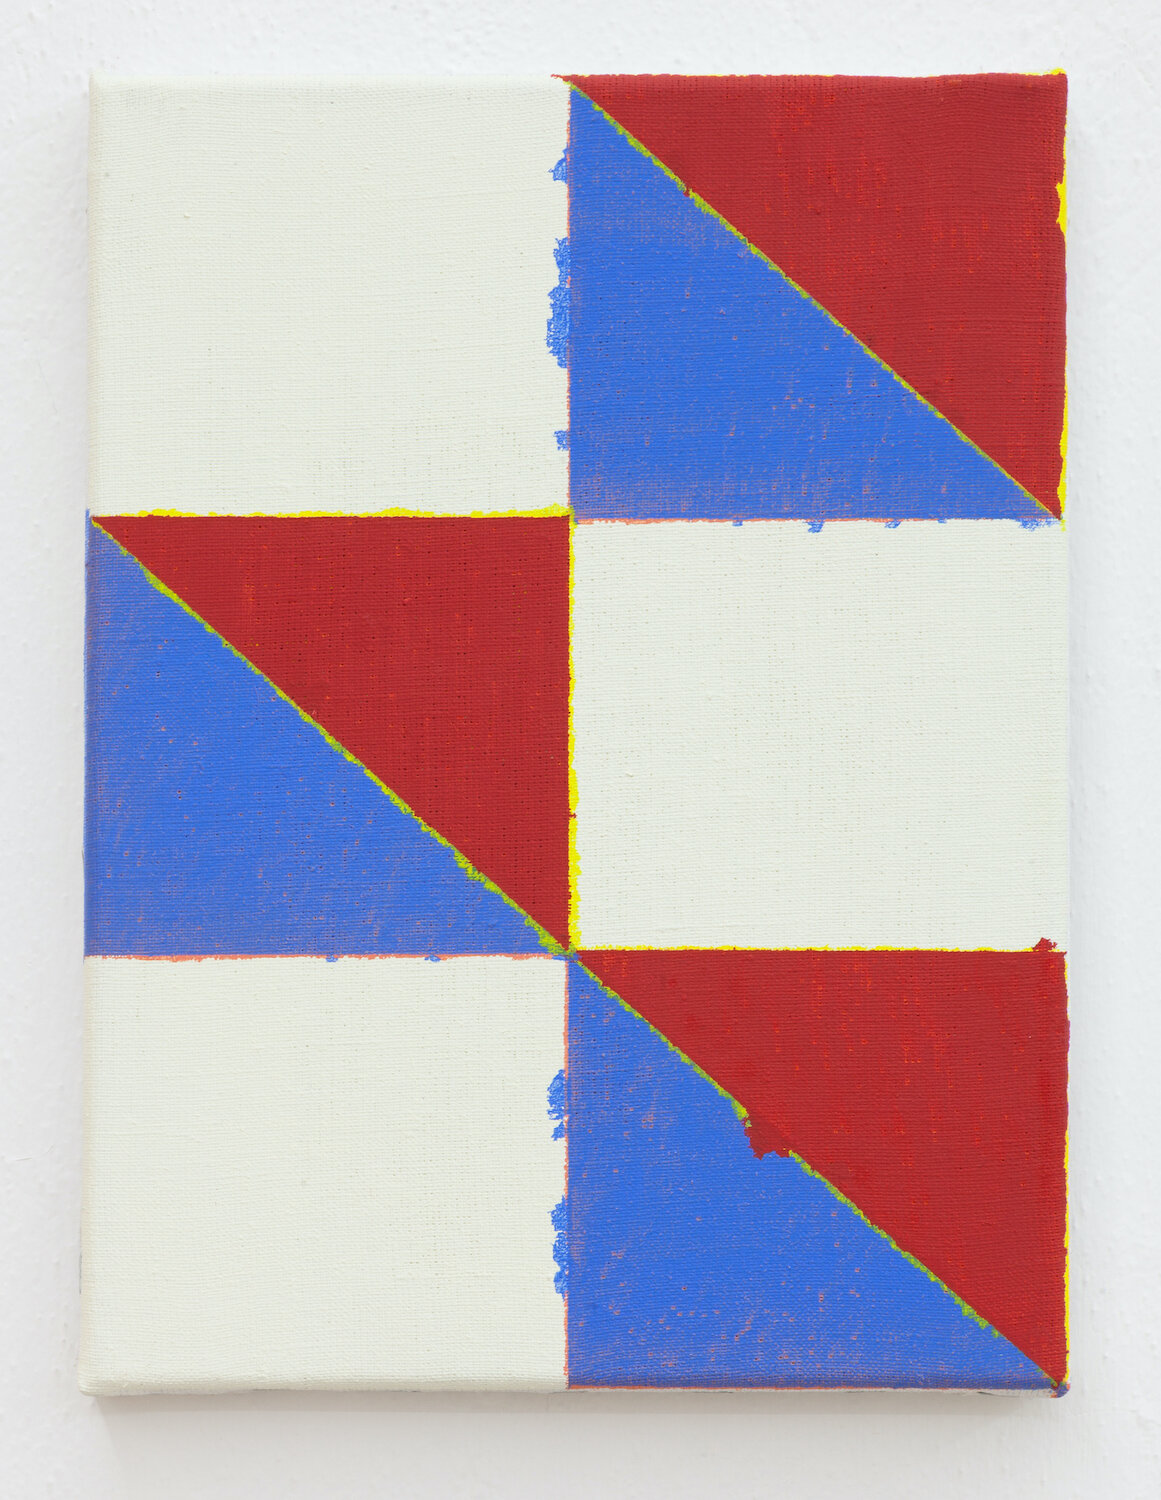  Joshua Abelow,  Untitled (Abstraction “HU”),  2019, Oil on linen, 12 x 9 inches 